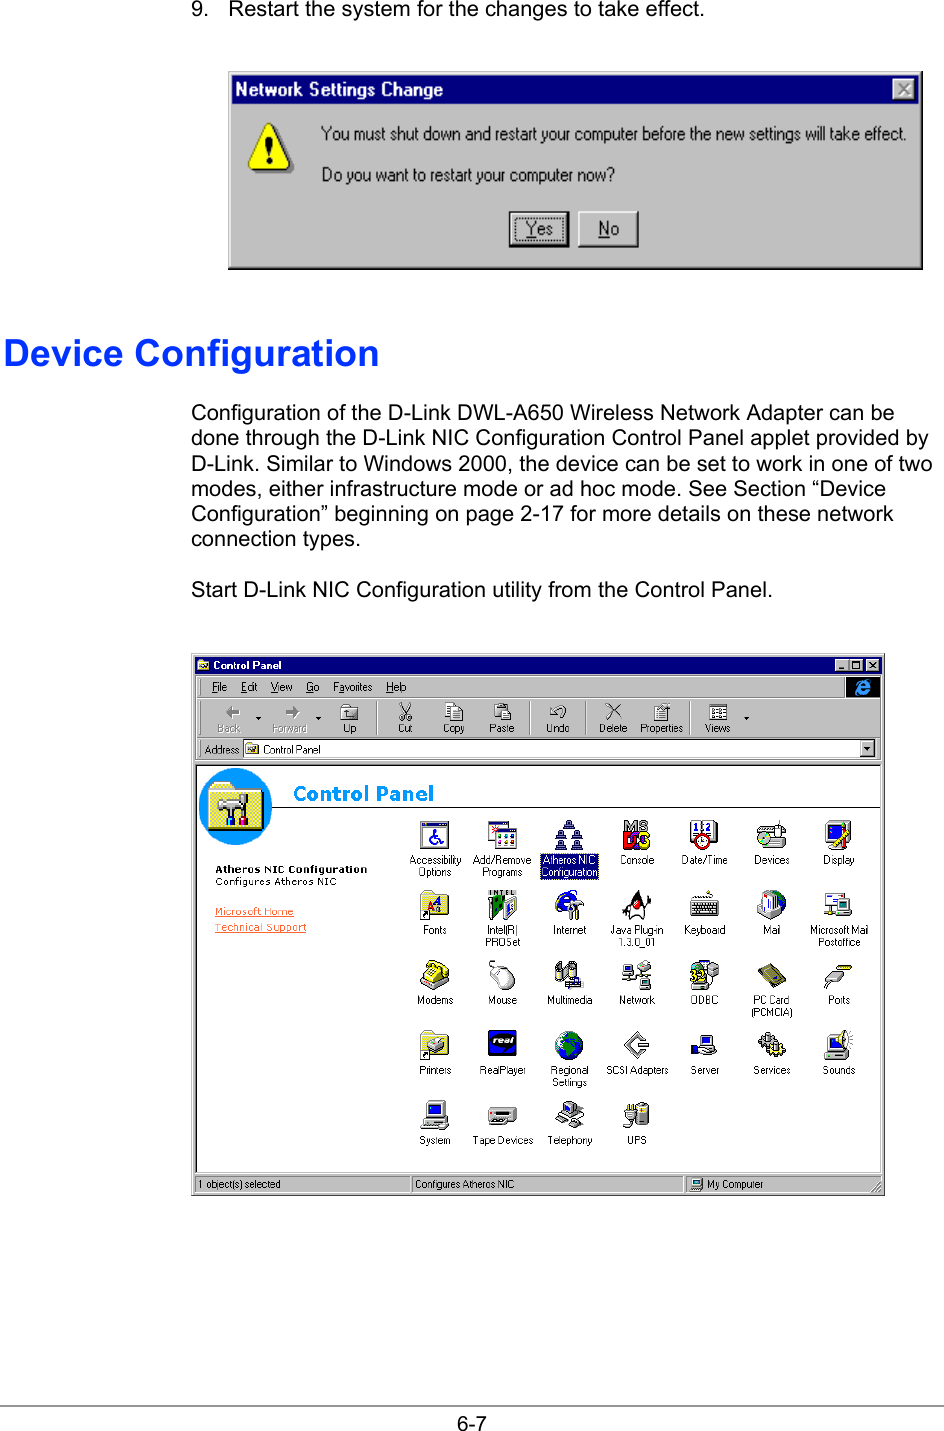  6-7 9.  Restart the system for the changes to take effect.  Device Configuration Configuration of the D-Link DWL-A650 Wireless Network Adapter can be done through the D-Link NIC Configuration Control Panel applet provided by D-Link. Similar to Windows 2000, the device can be set to work in one of two modes, either infrastructure mode or ad hoc mode. See Section “Device Configuration” beginning on page 2-17 for more details on these network connection types. Start D-Link NIC Configuration utility from the Control Panel.   